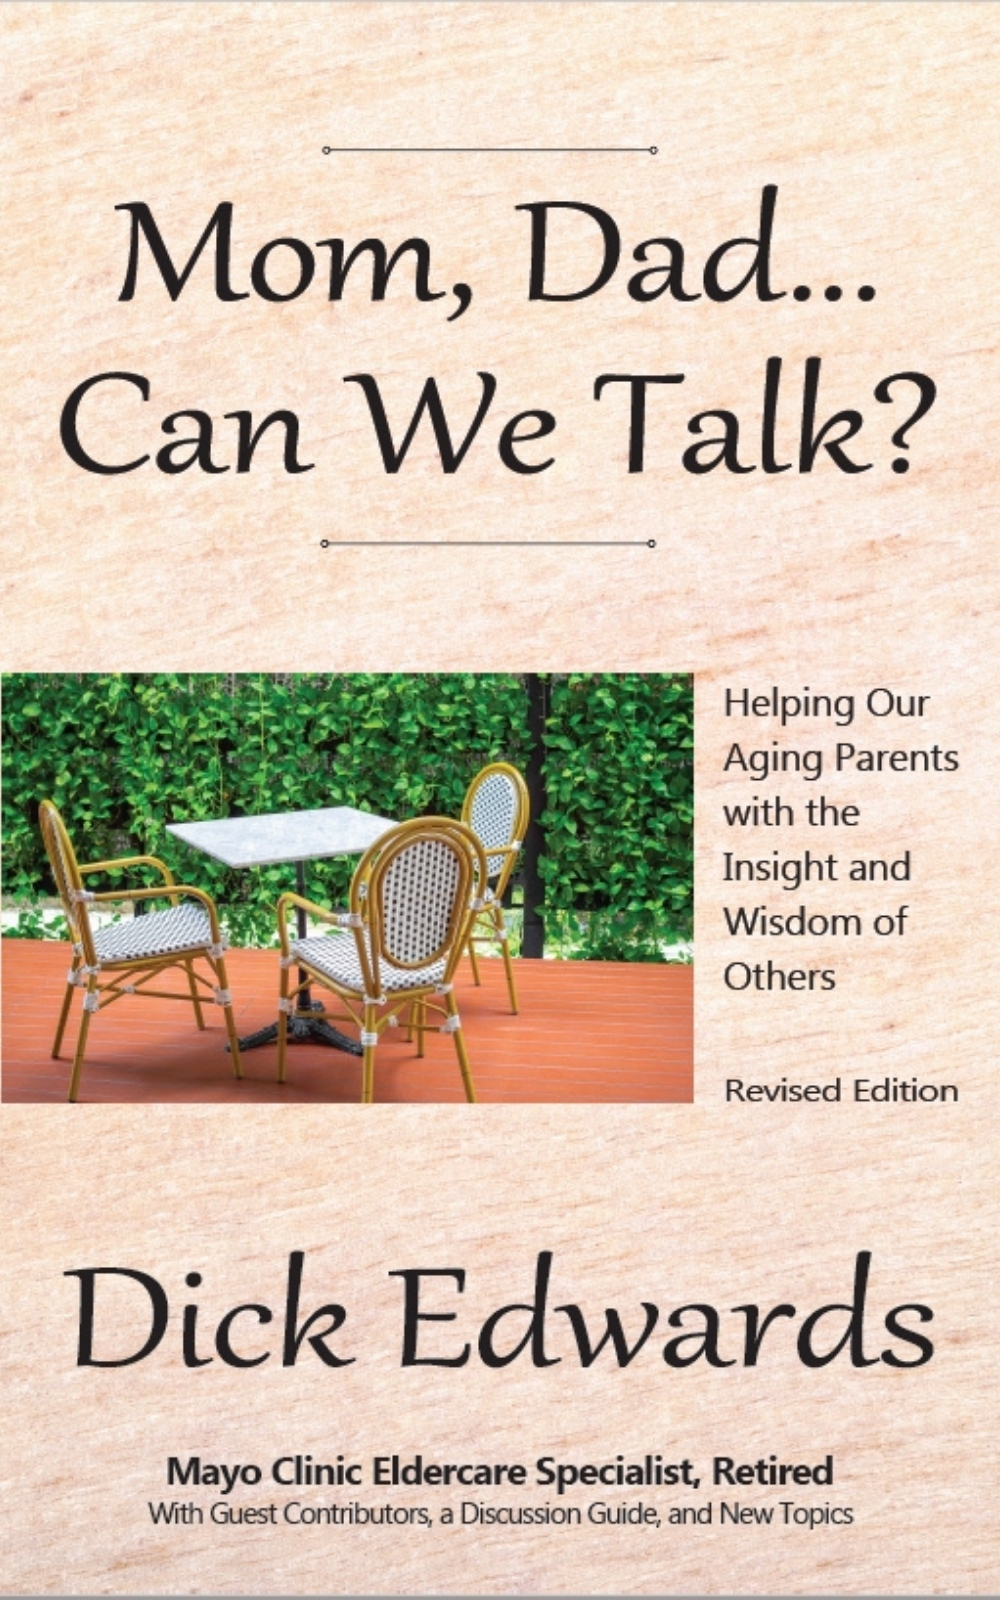 Mom, Dad…Can We Talk? Helping our Aging Parents with the Insight and Wisdom of Others